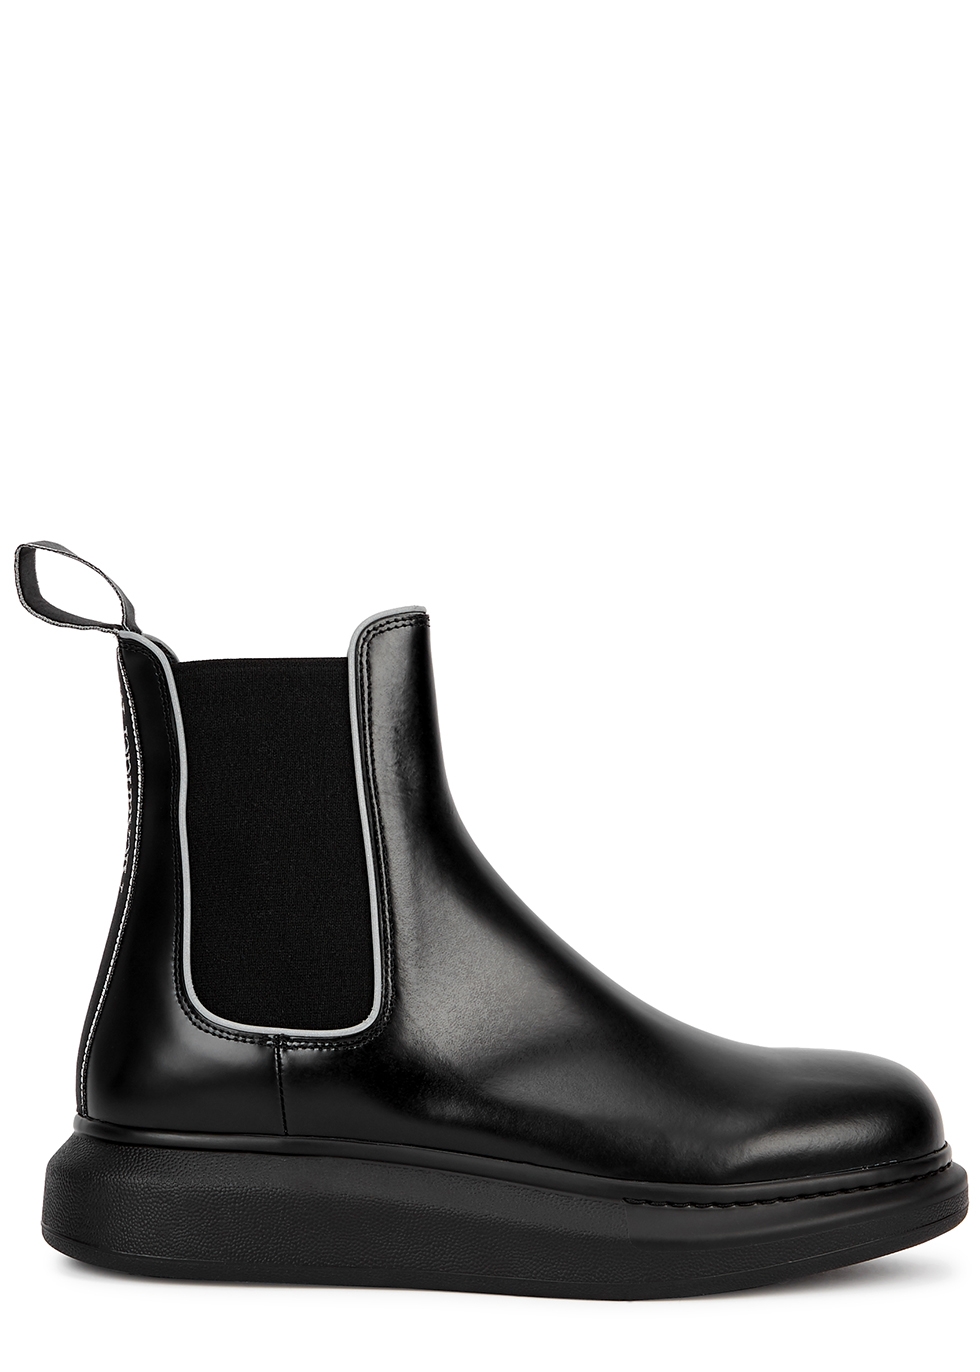 Hybrid black leather Chelsea boots